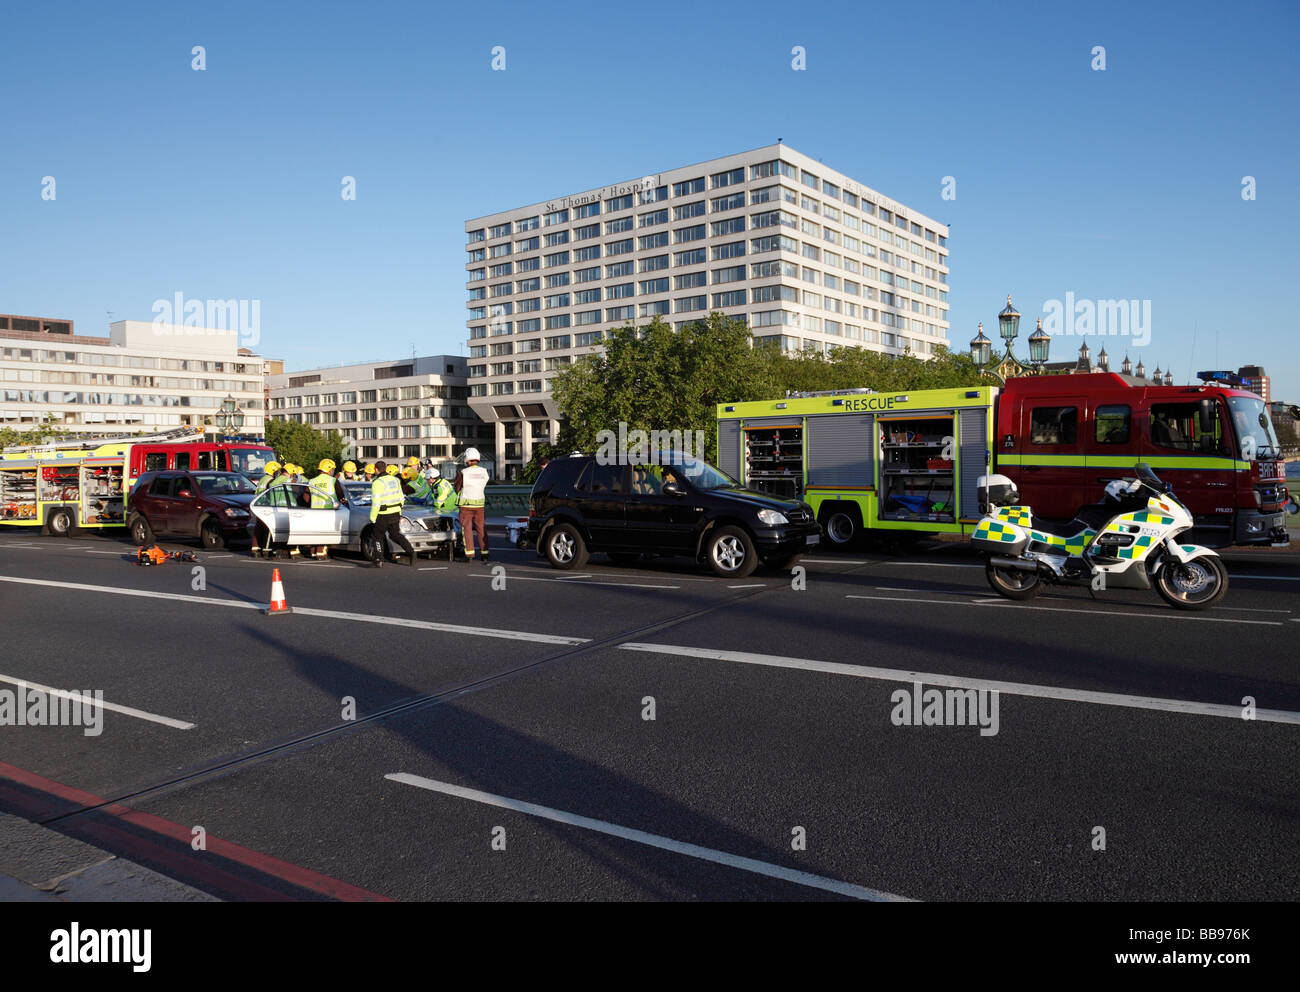 Emergency services attending the scene of an accident. Westminster, London, England, UK. Stock Photo